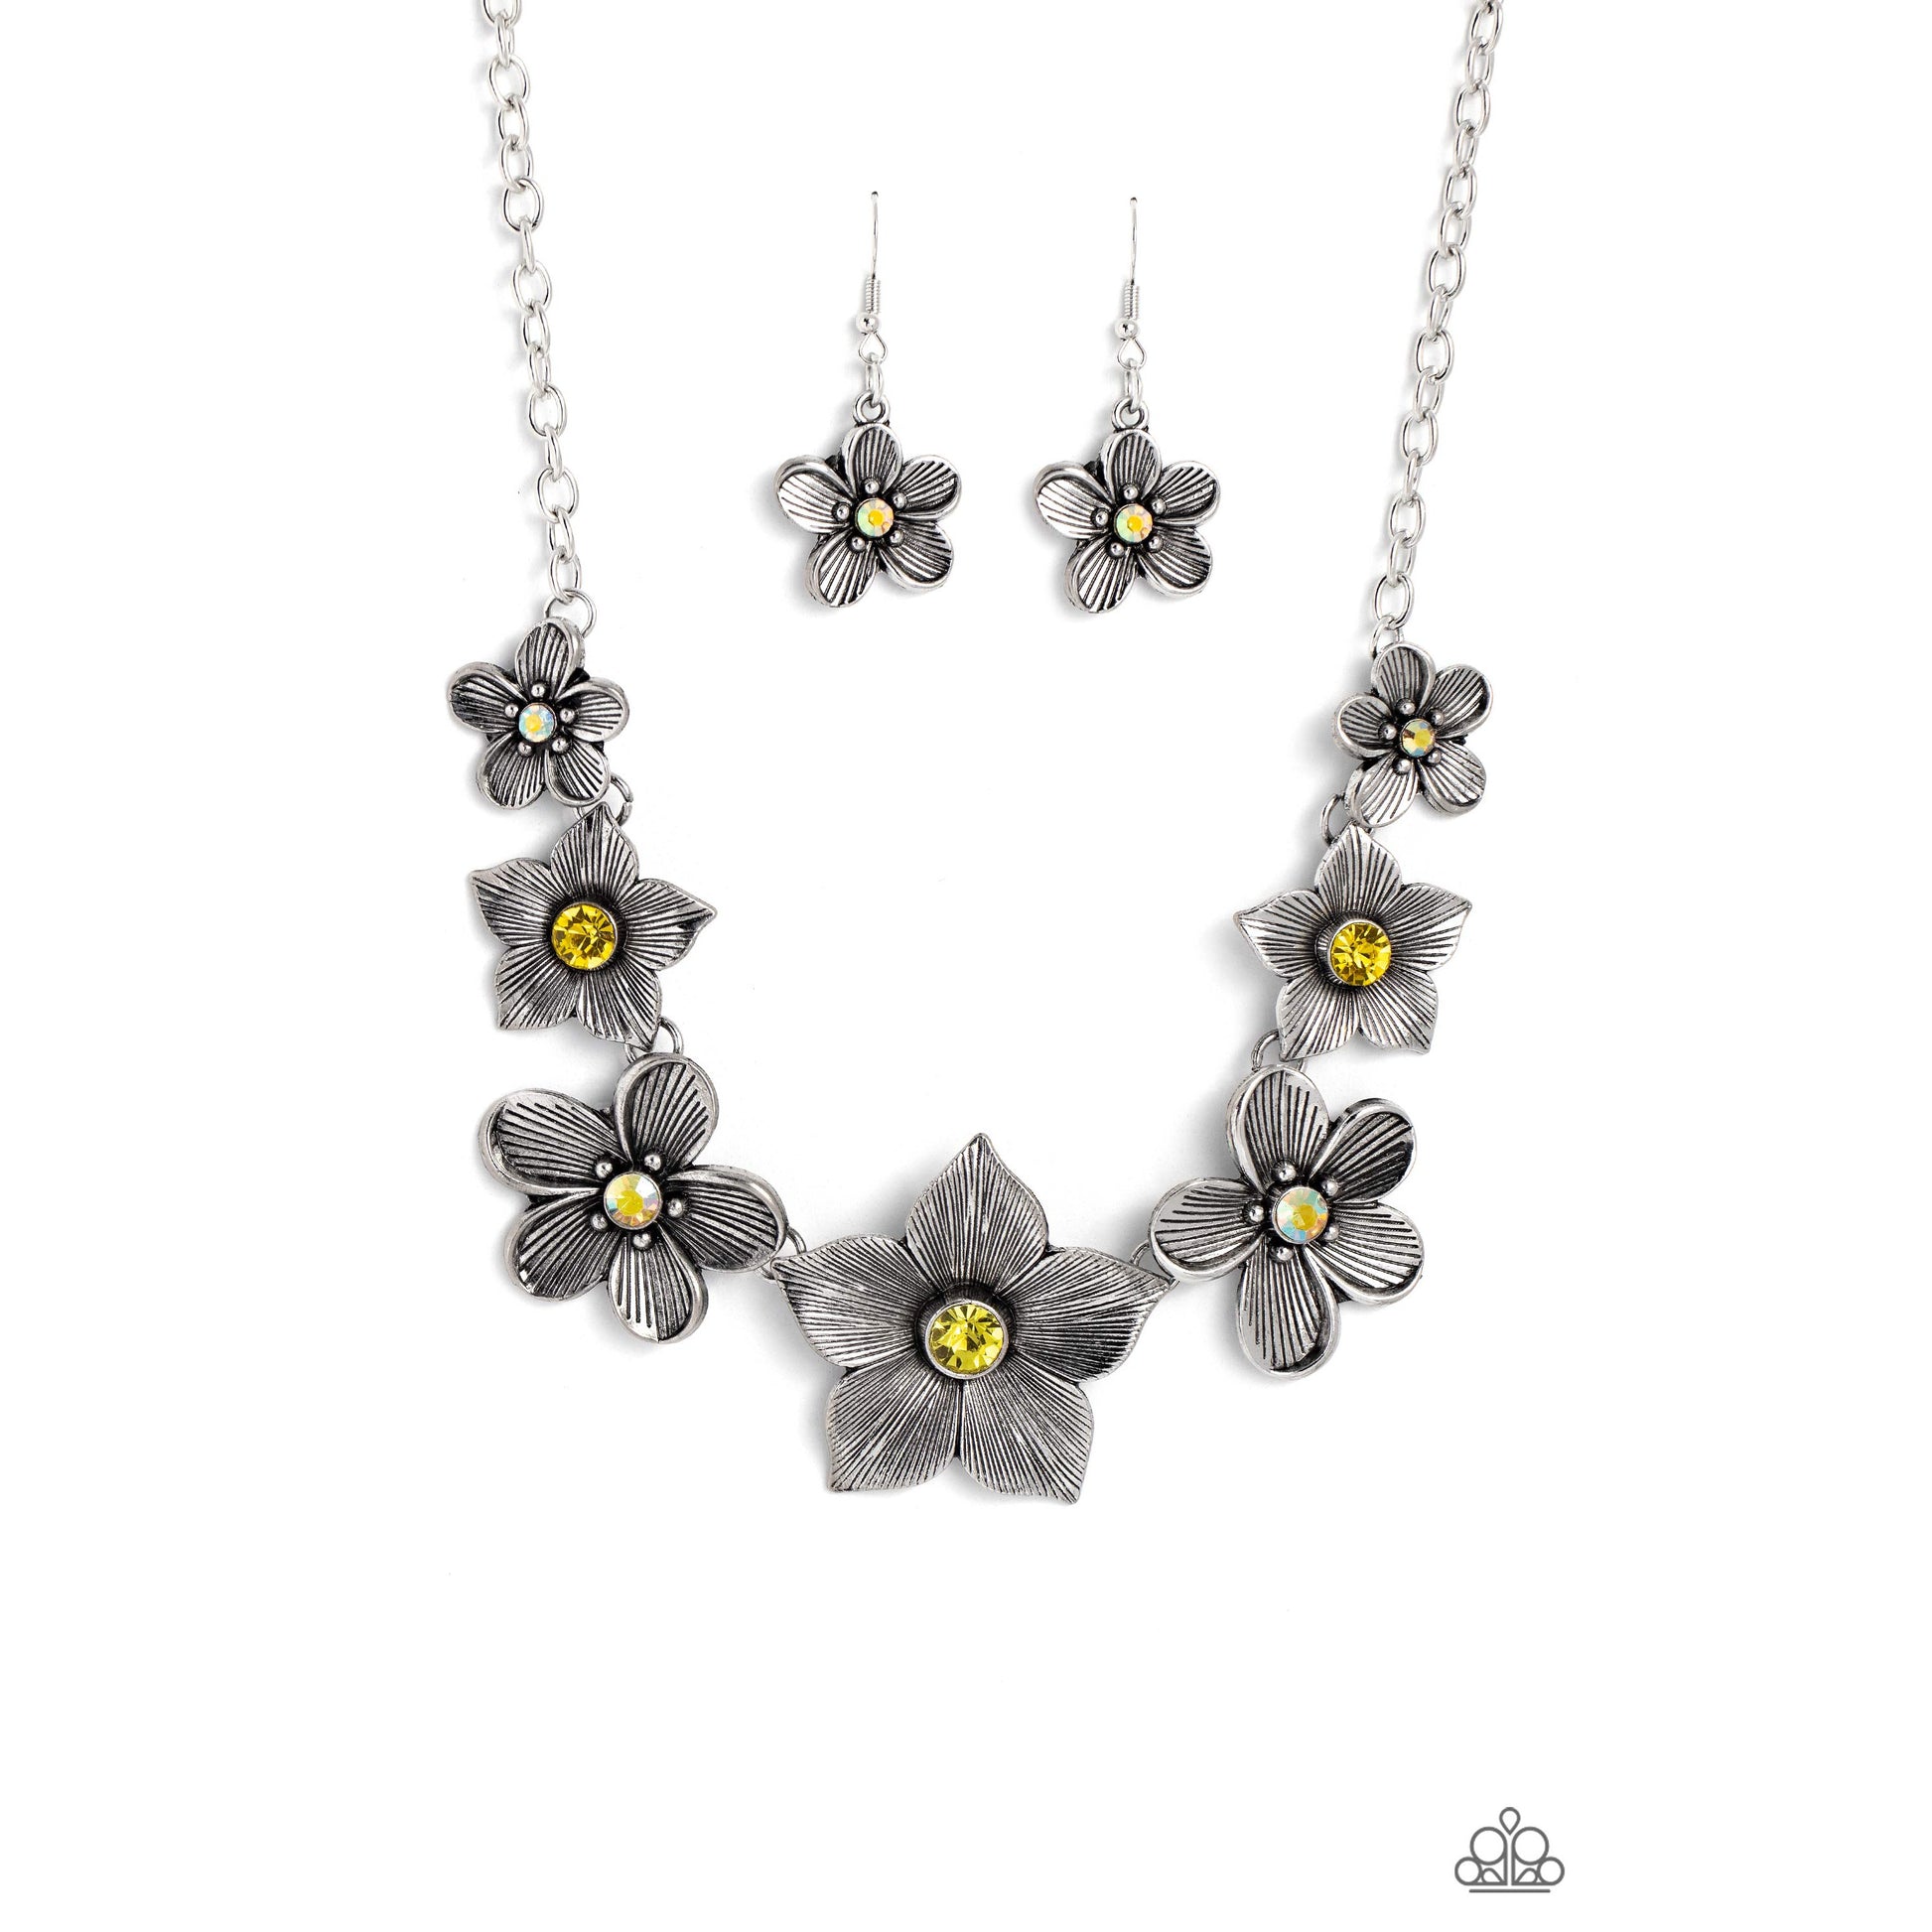 Free FLORAL - Yellow Flower Necklace - Bling by Danielle Baker